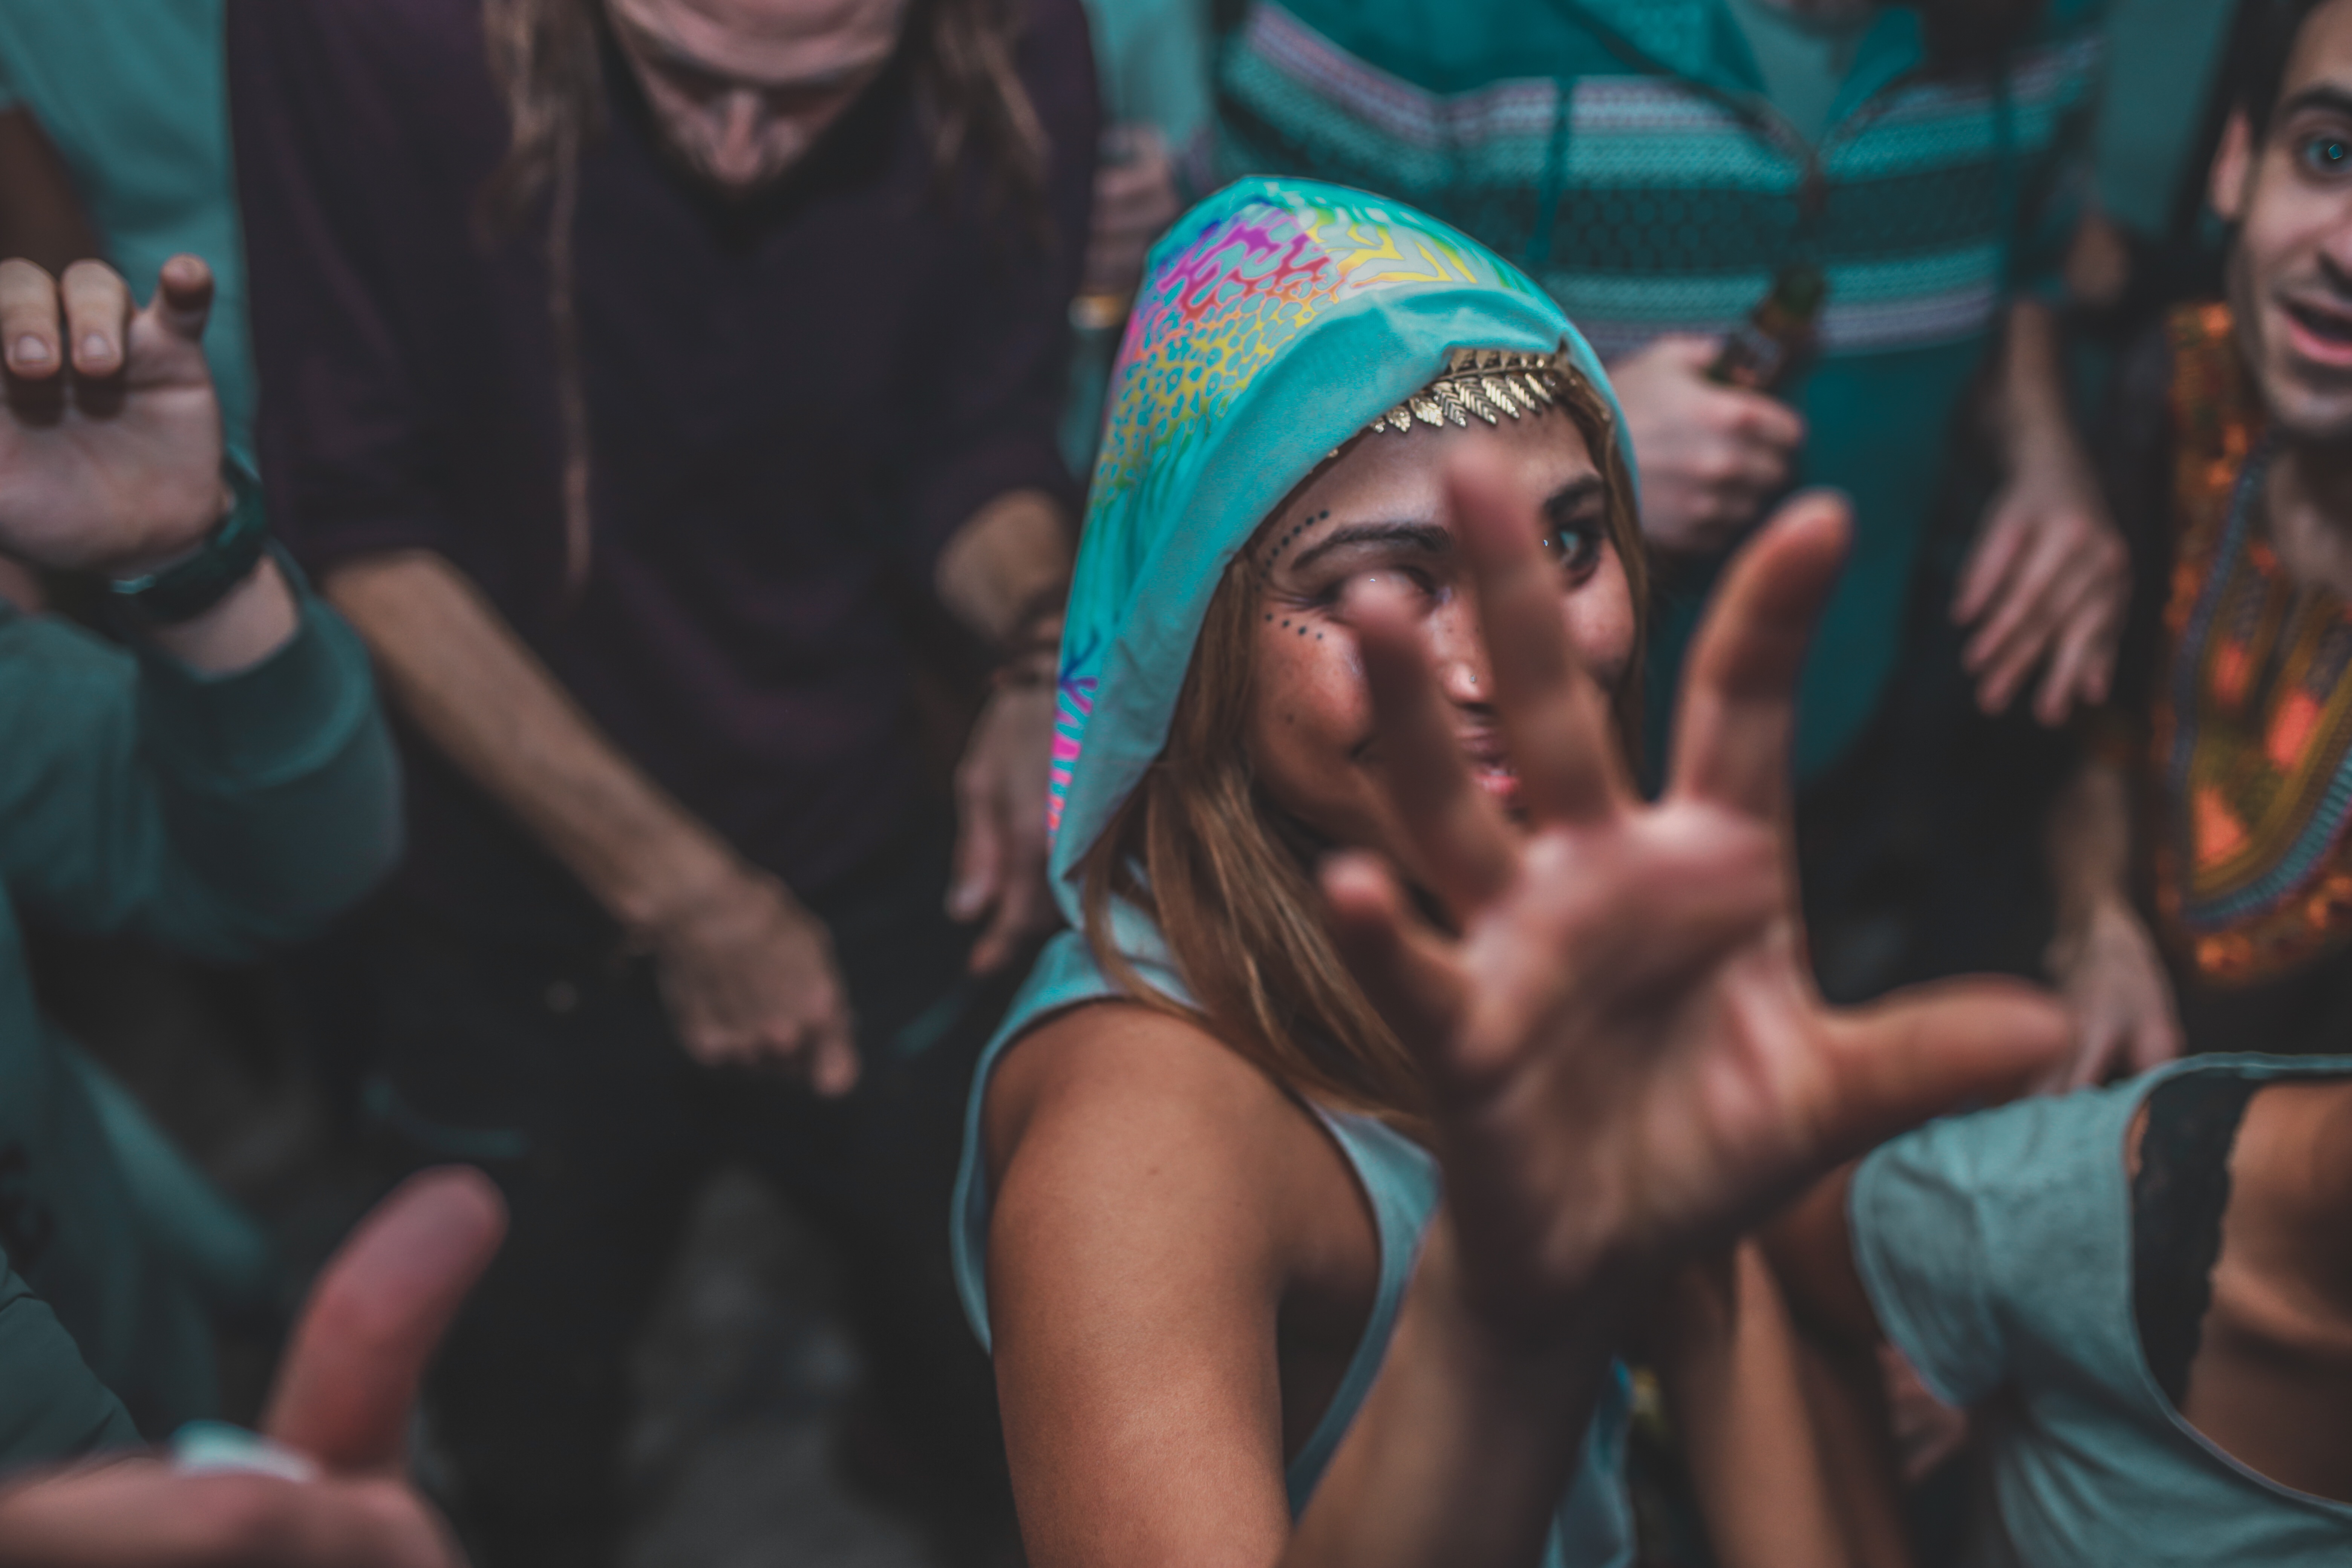 Psytrance: A Peek Into the Extraterrestrial Music Invading Egypt